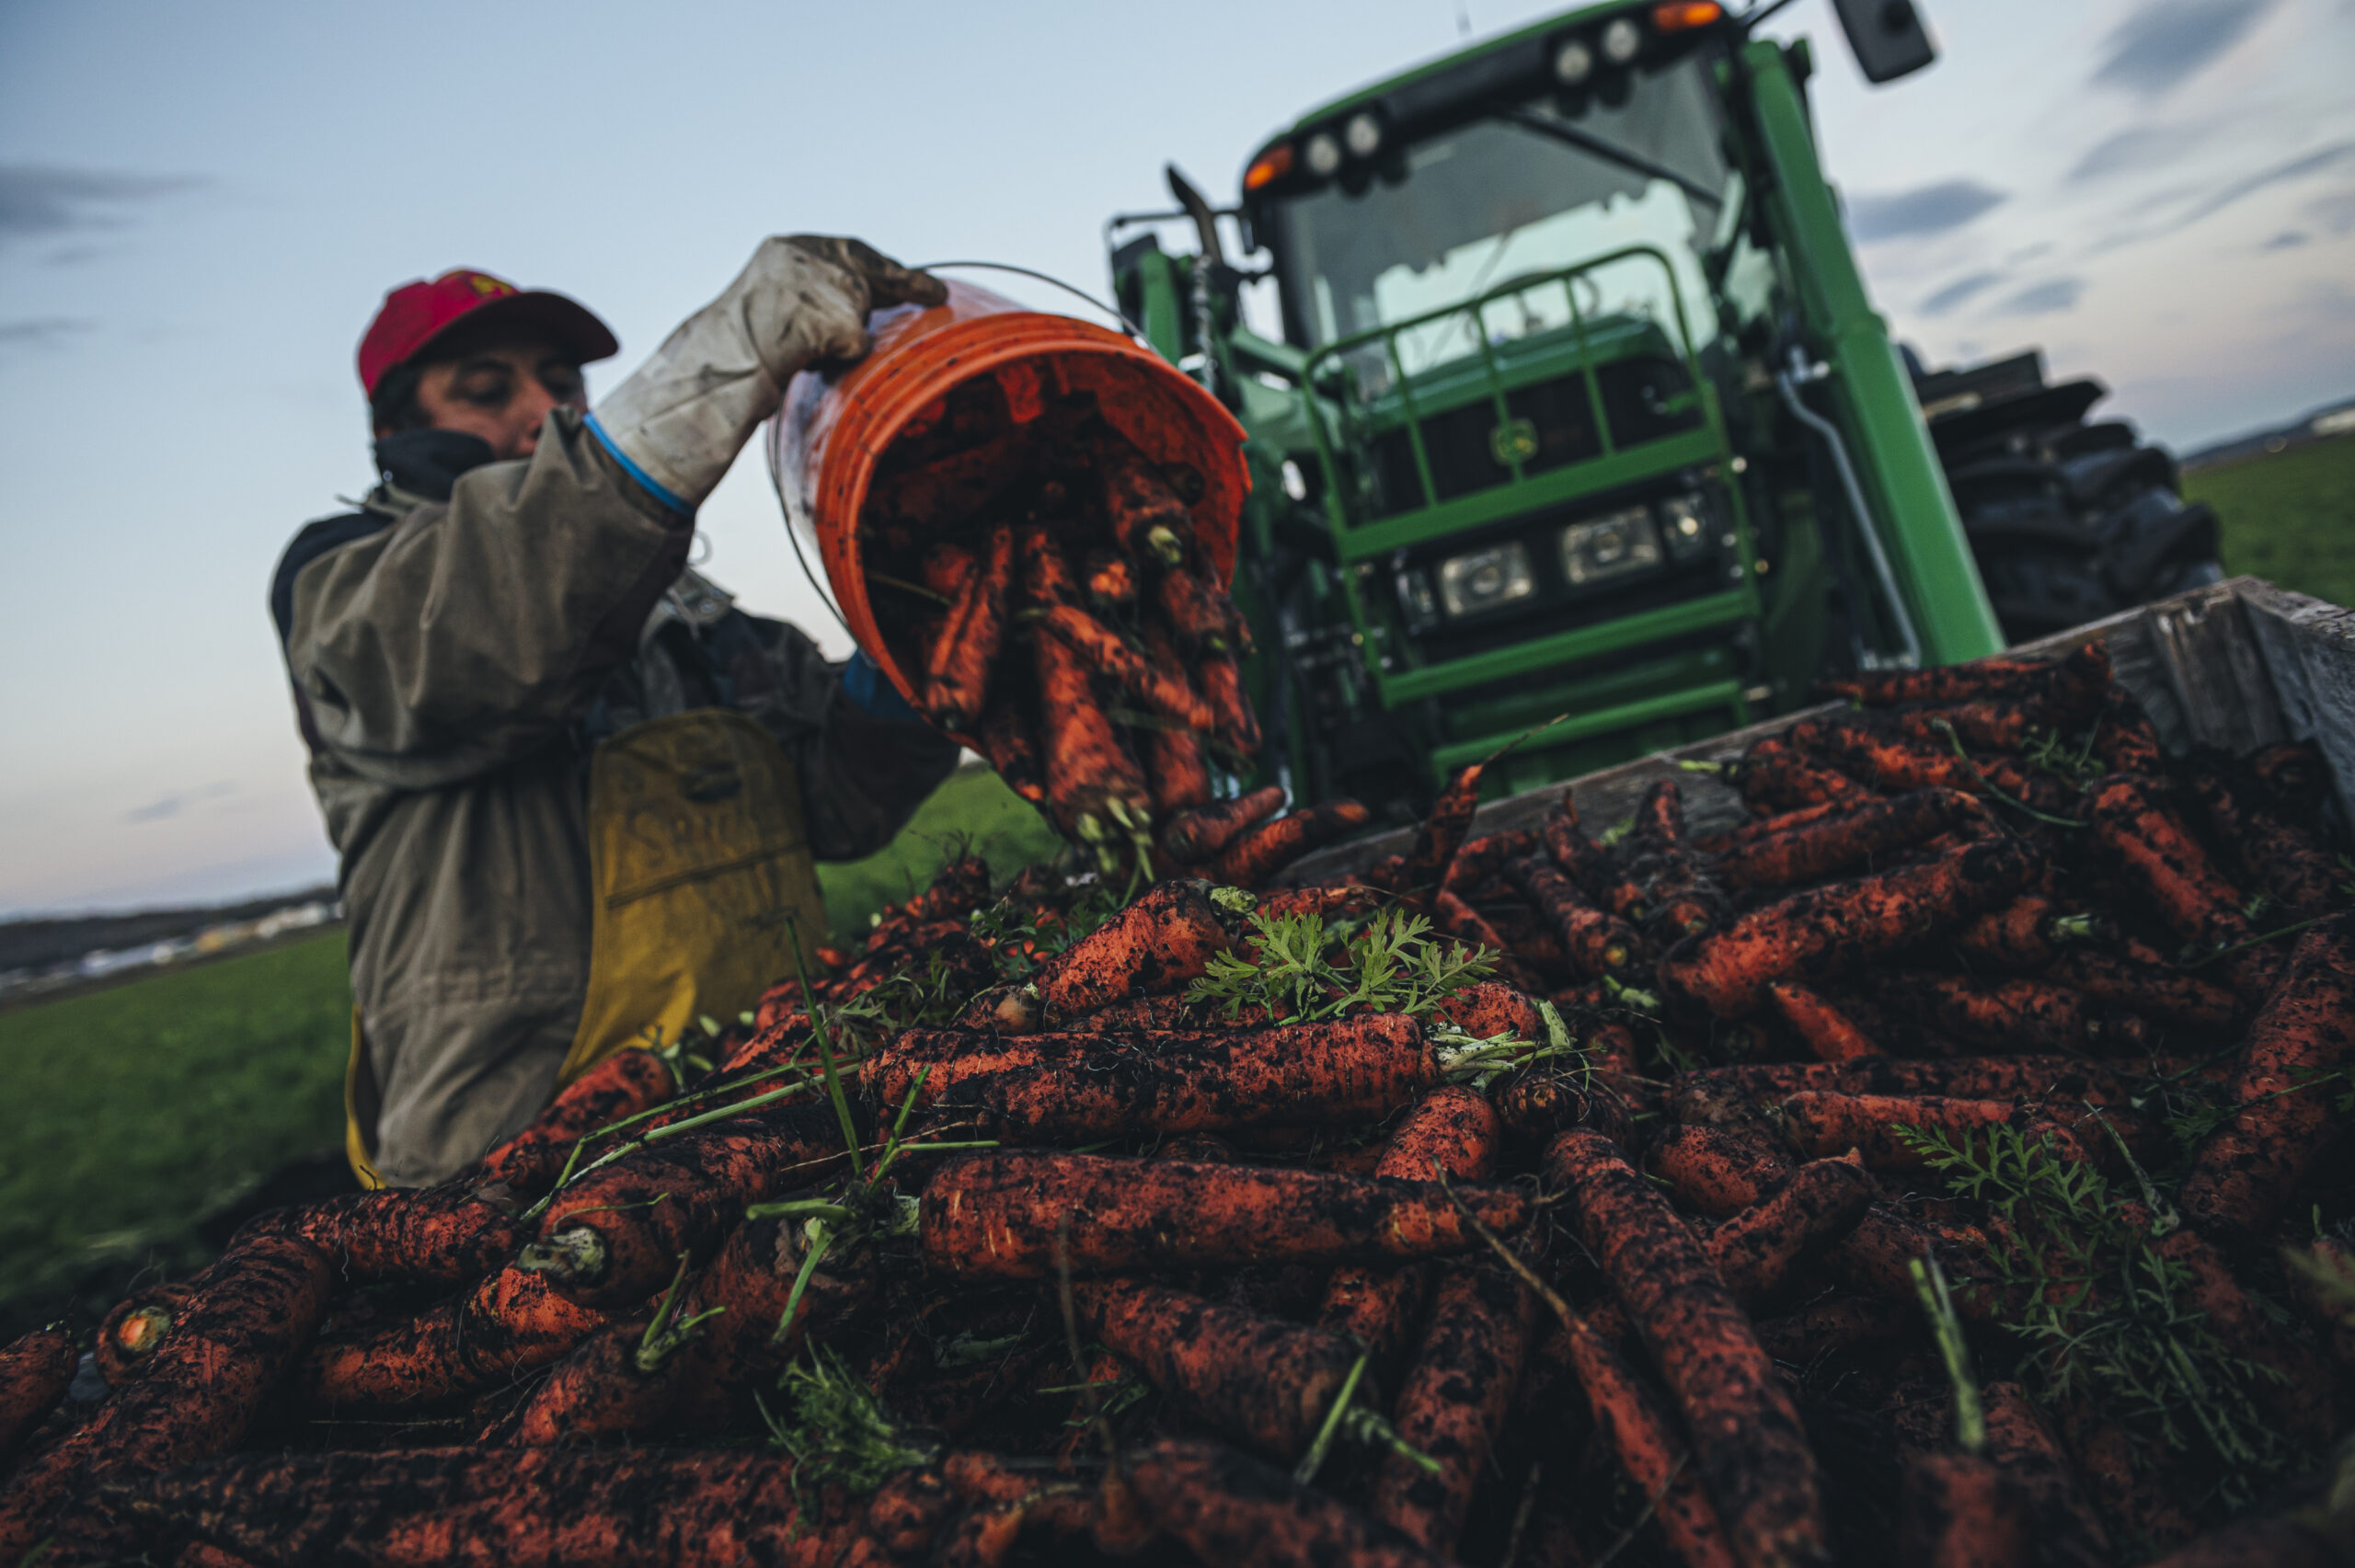 A man pouring carrots from a bucket into a larger pile on a tractor